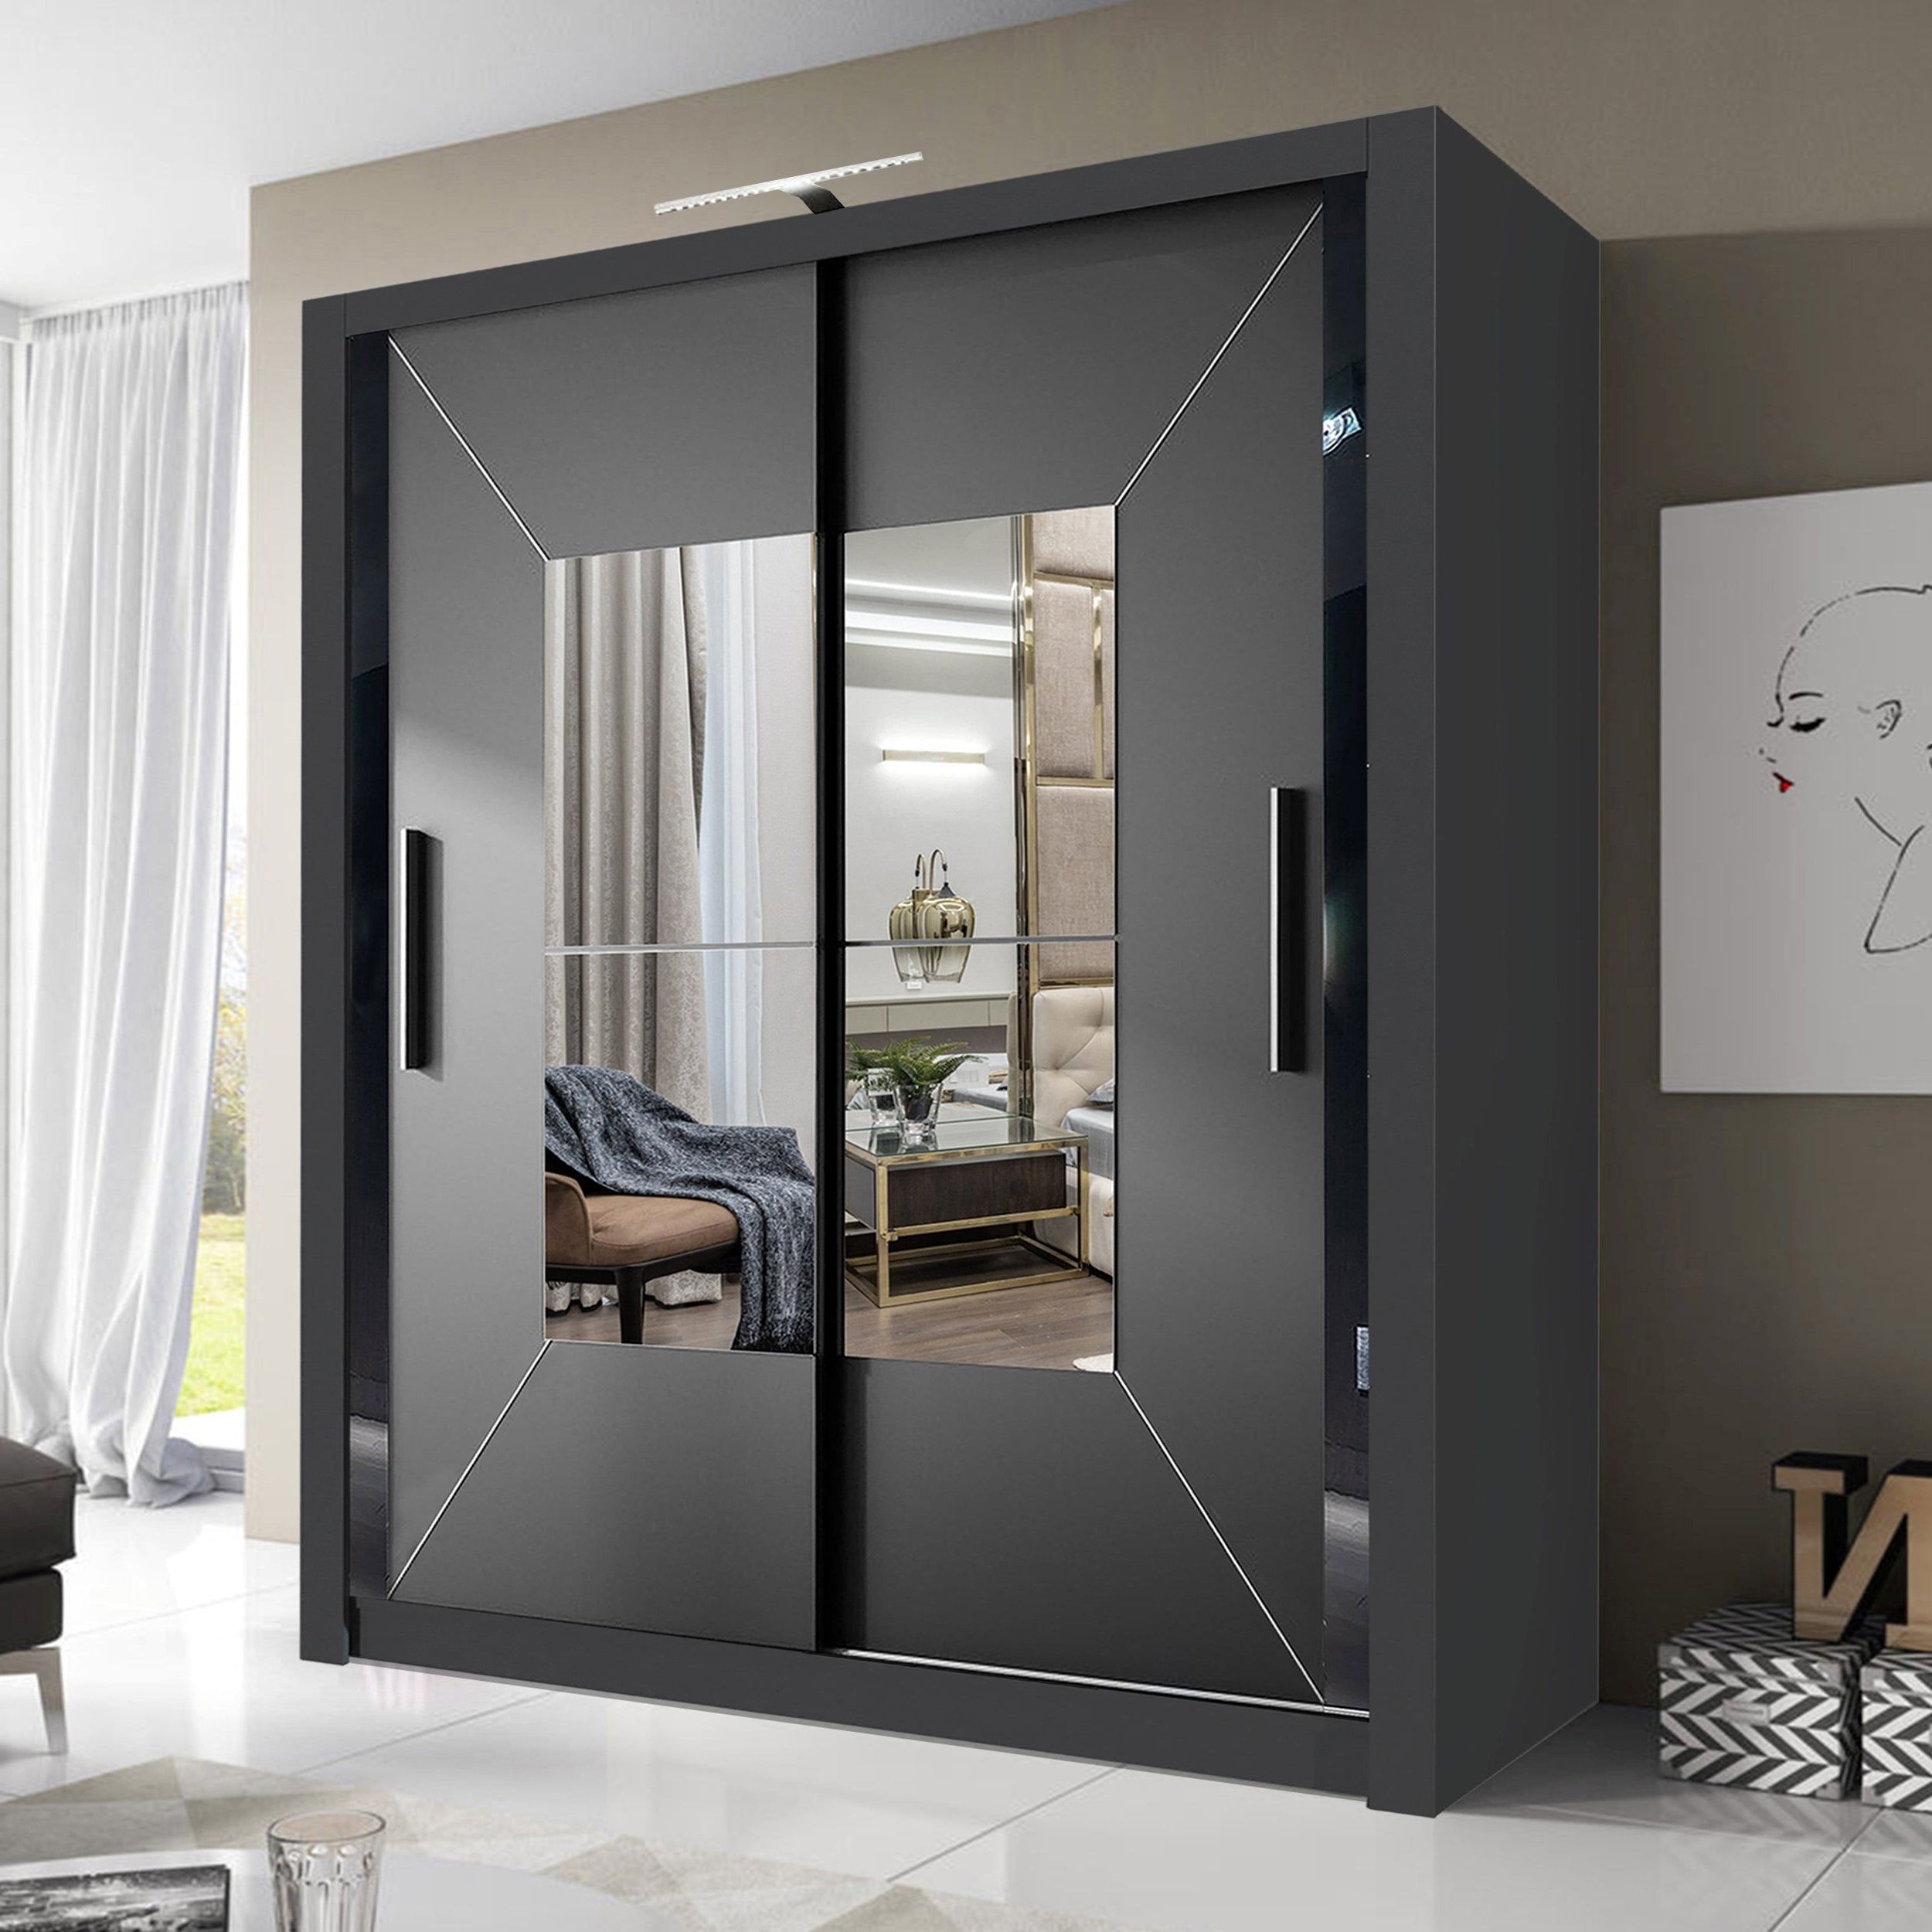 Blisswood Modern Sliding Mirrored Wardrobe, 203cm | Wardrobe Interior  Design, Wardrobe Design Bedroom, Sliding Door Wardrobe Designs Within Black Wardrobes With Mirror (Gallery 8 of 20)